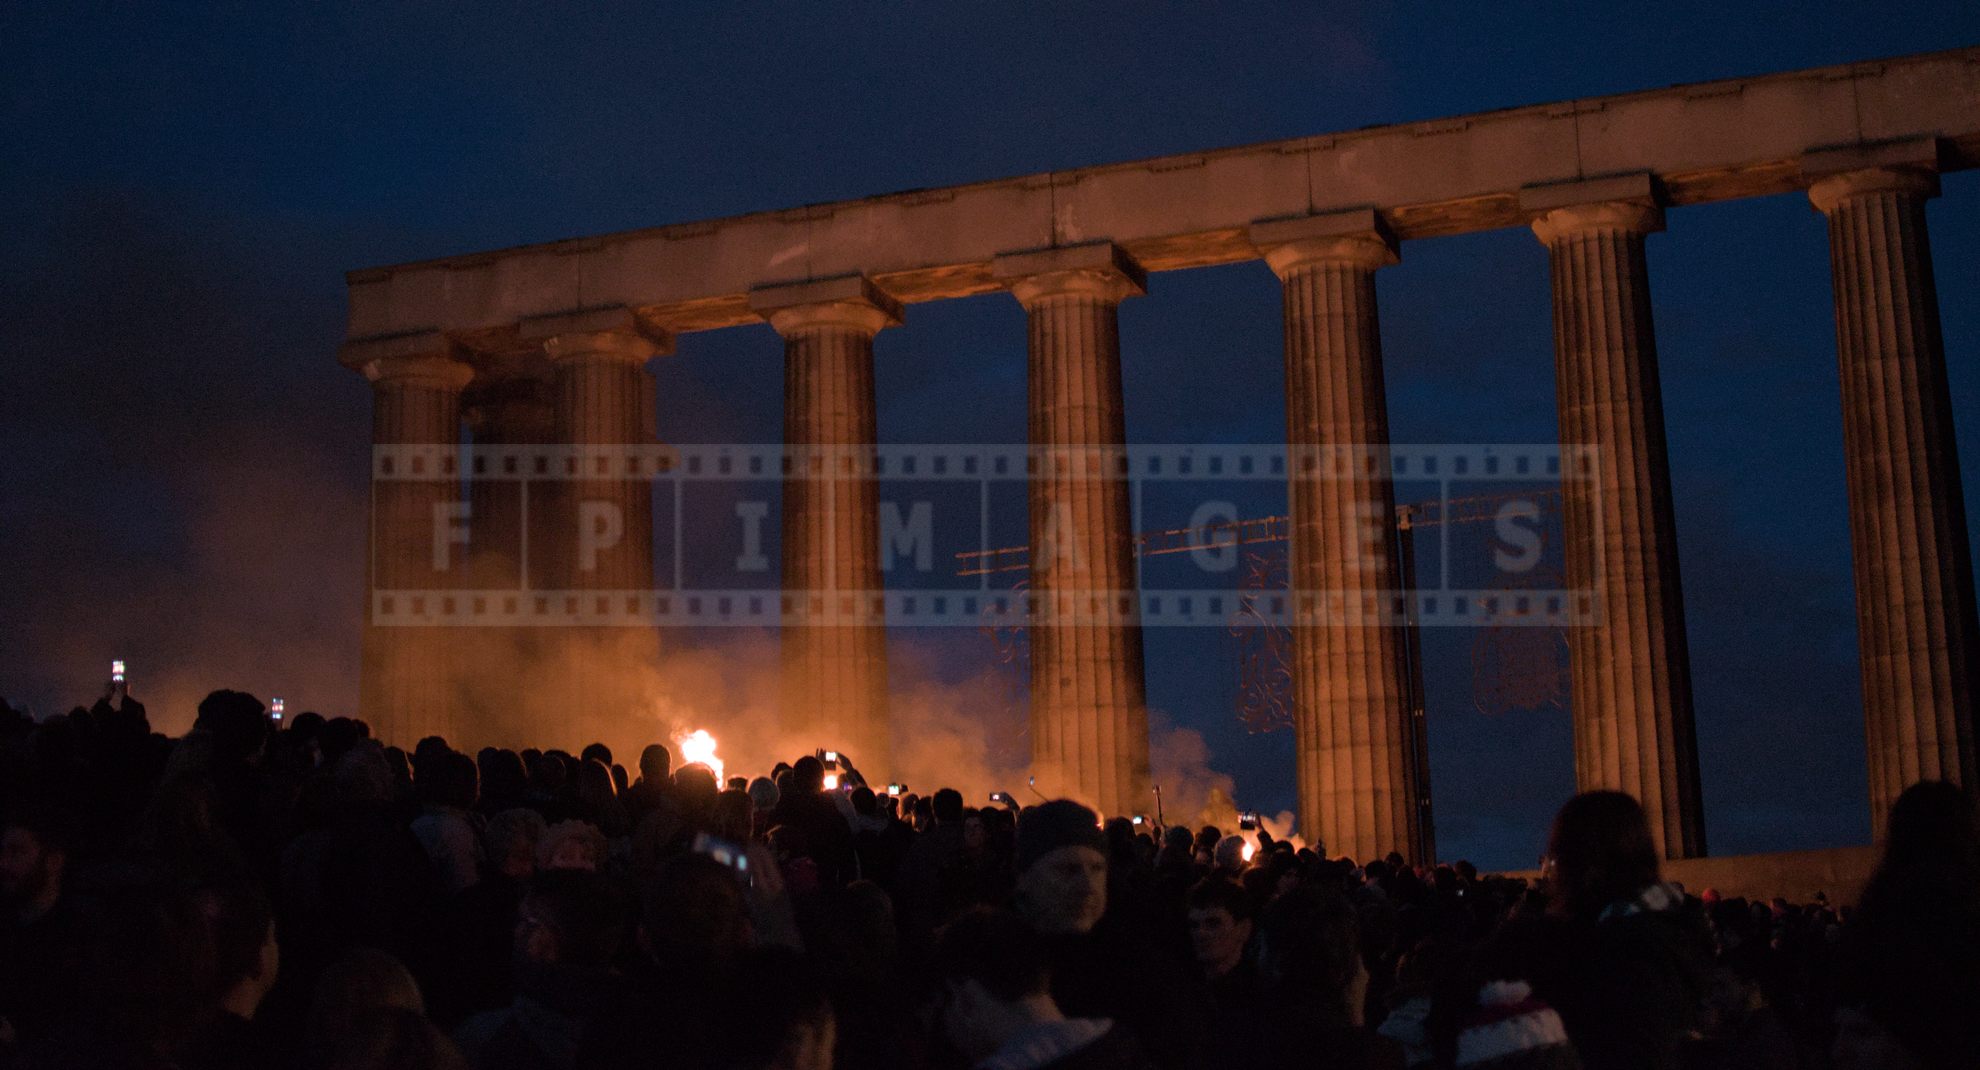 Start of the Beltane Fire show by the National Monument of Scotland